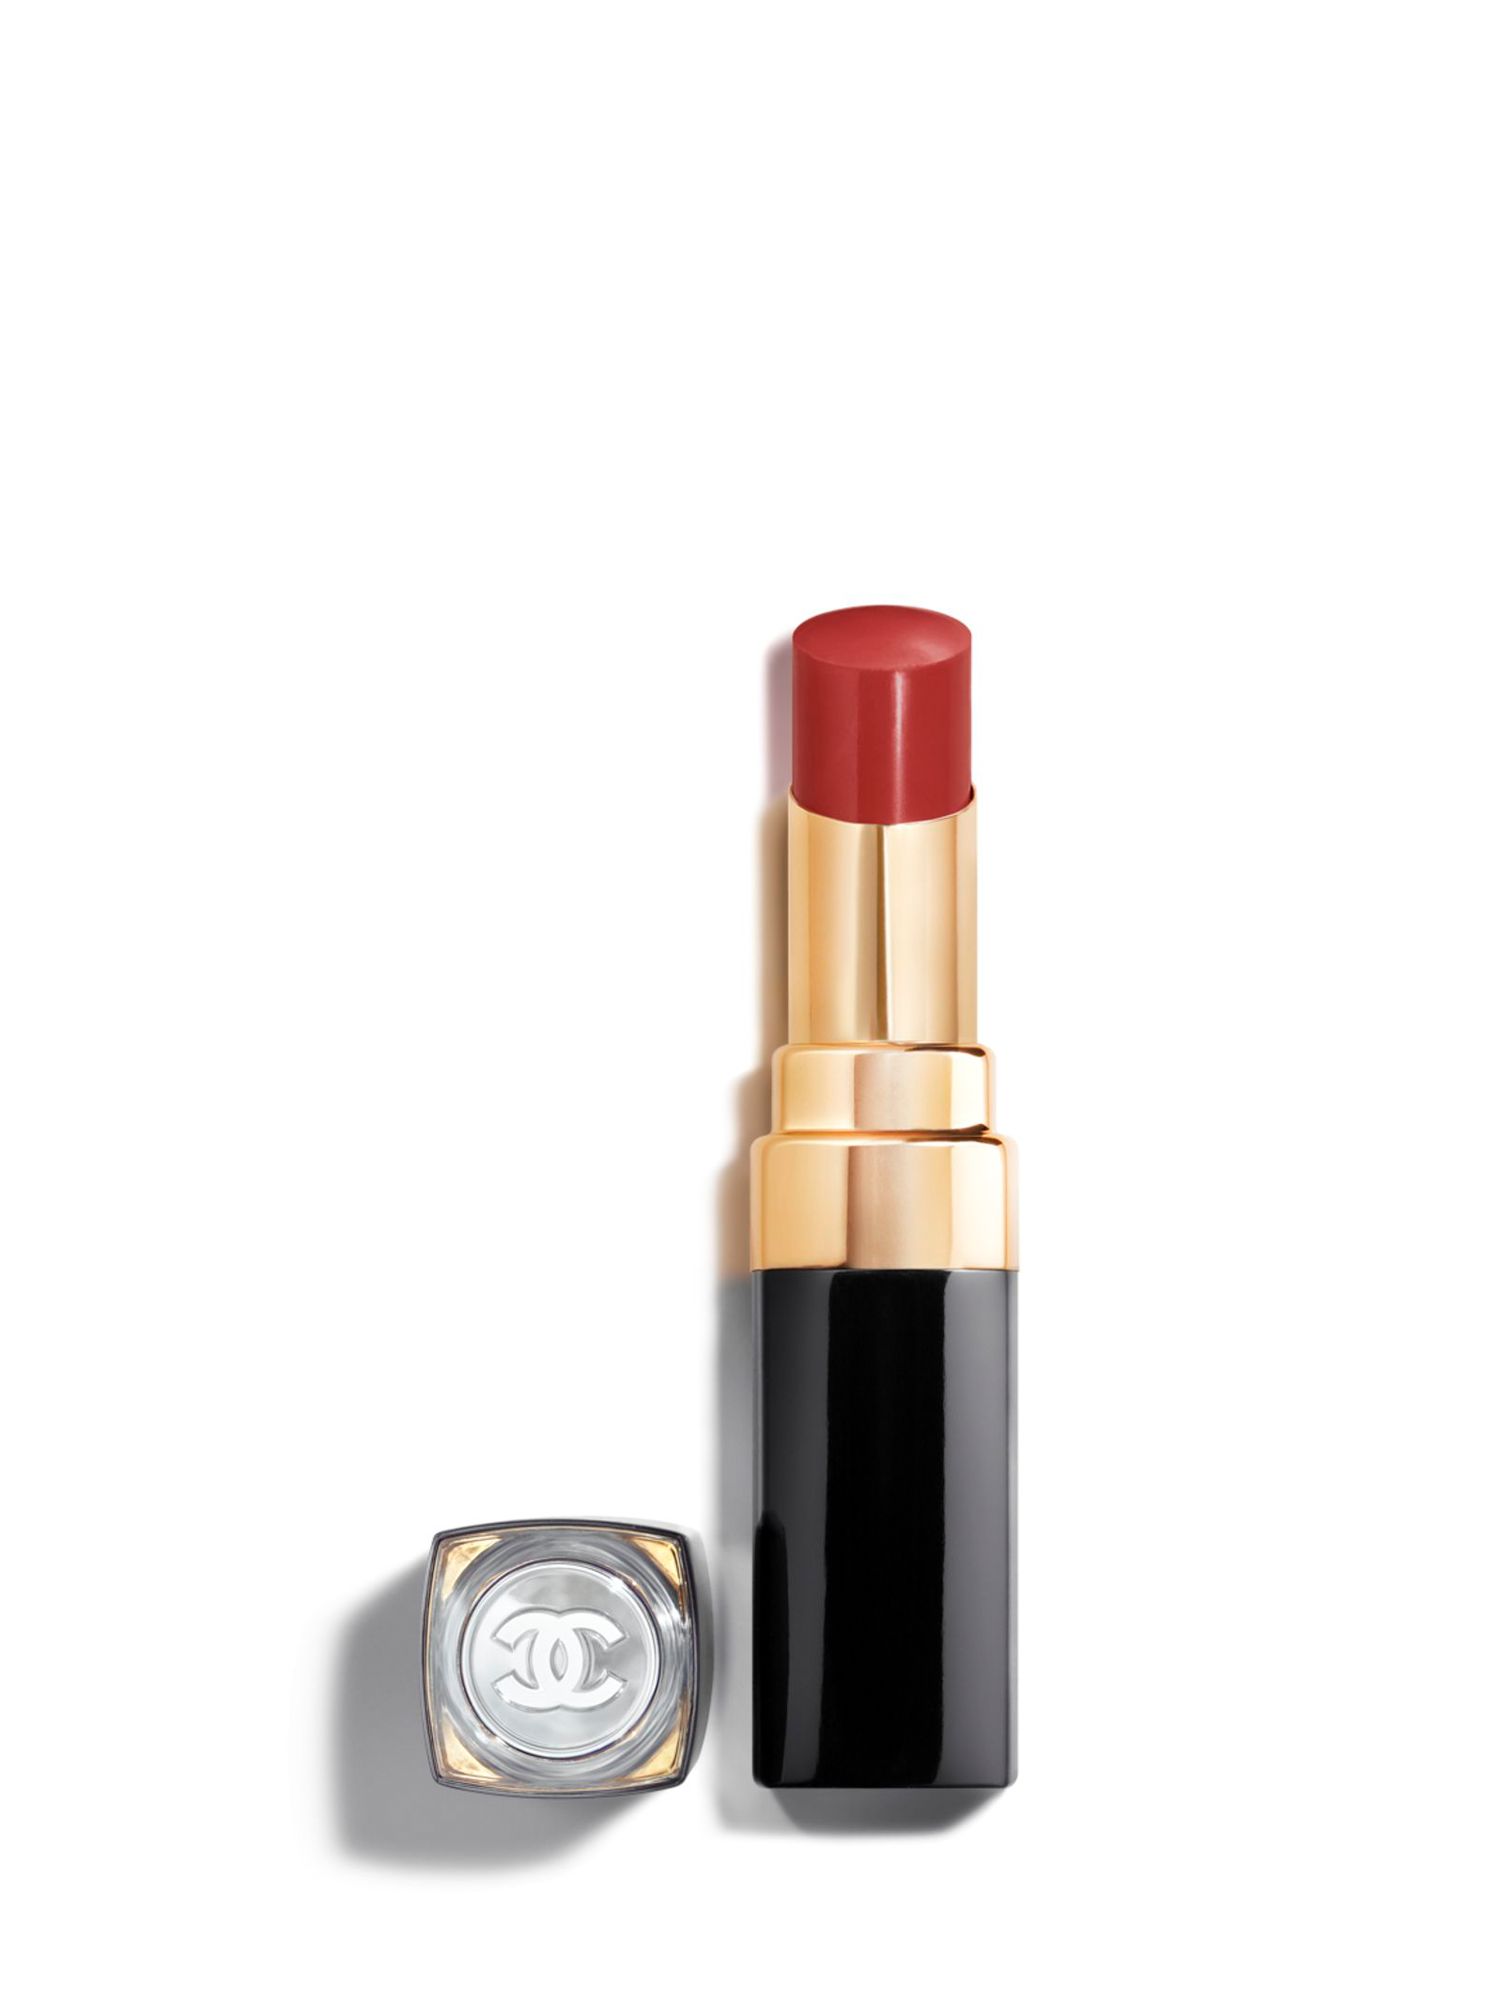 CHANEL Rouge Coco Flash Colour, Shine, Intensity In A Flash, 176 Escapade 1